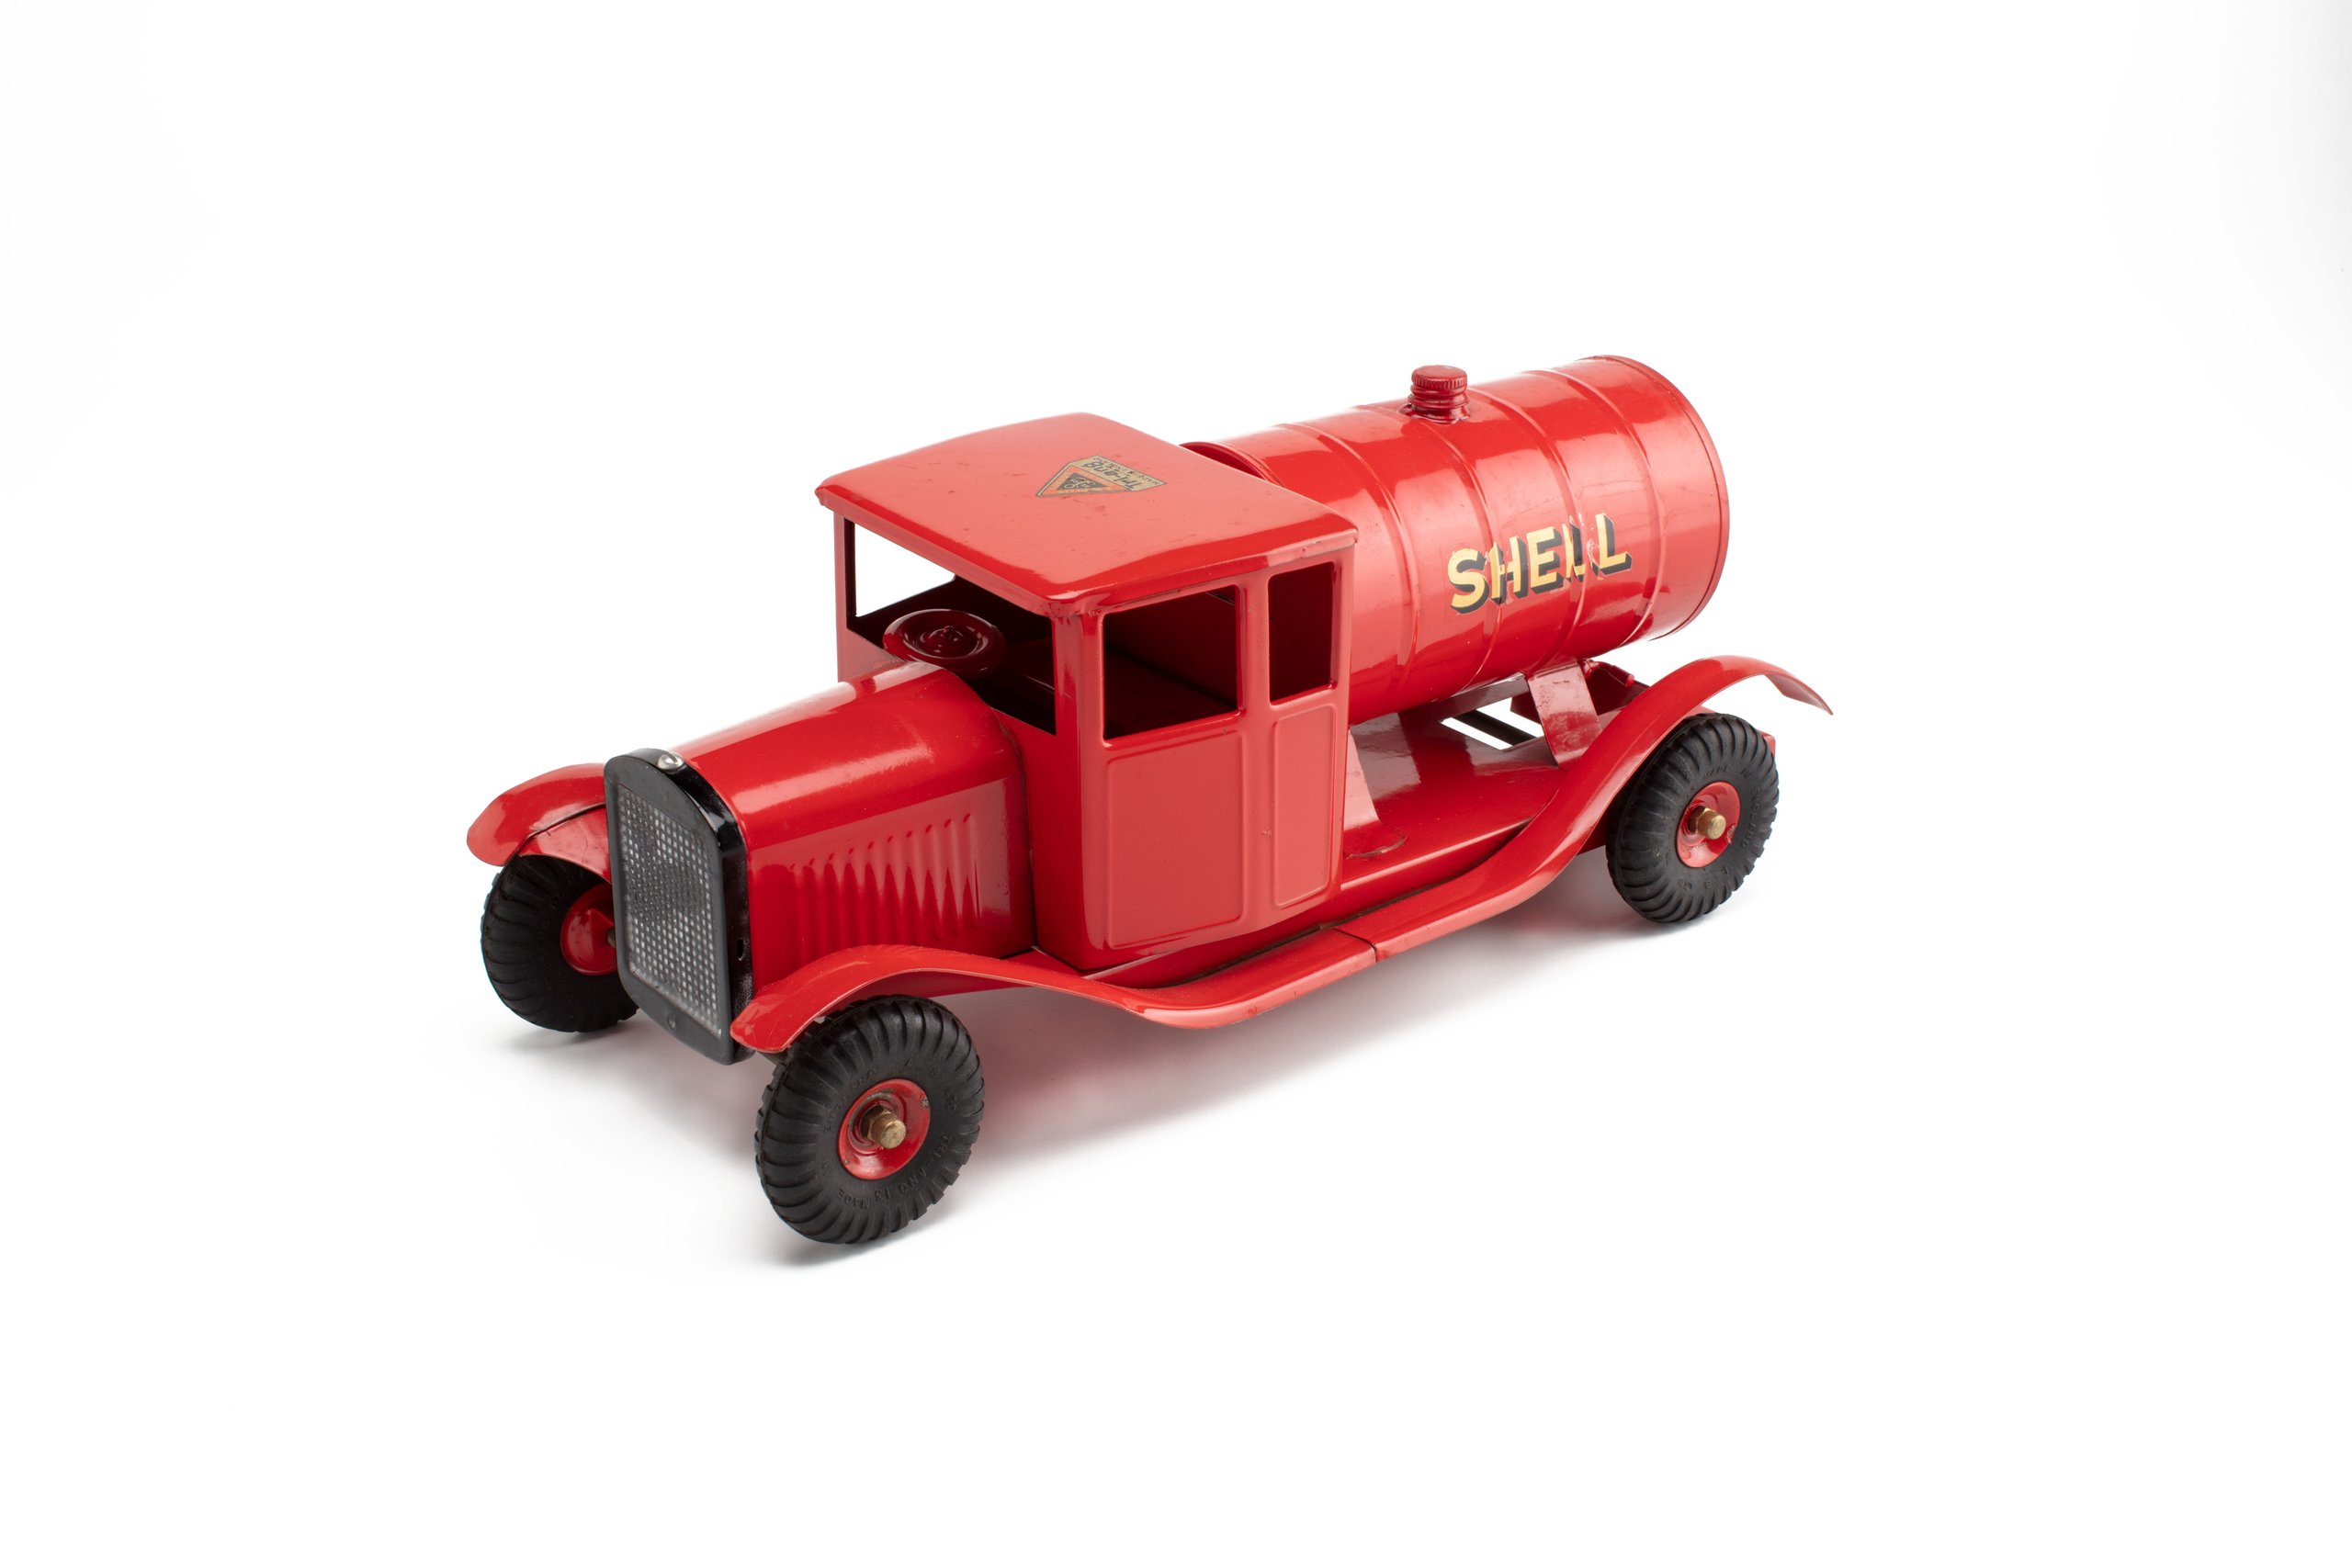 Toy petrol tanker made by Lines Bros